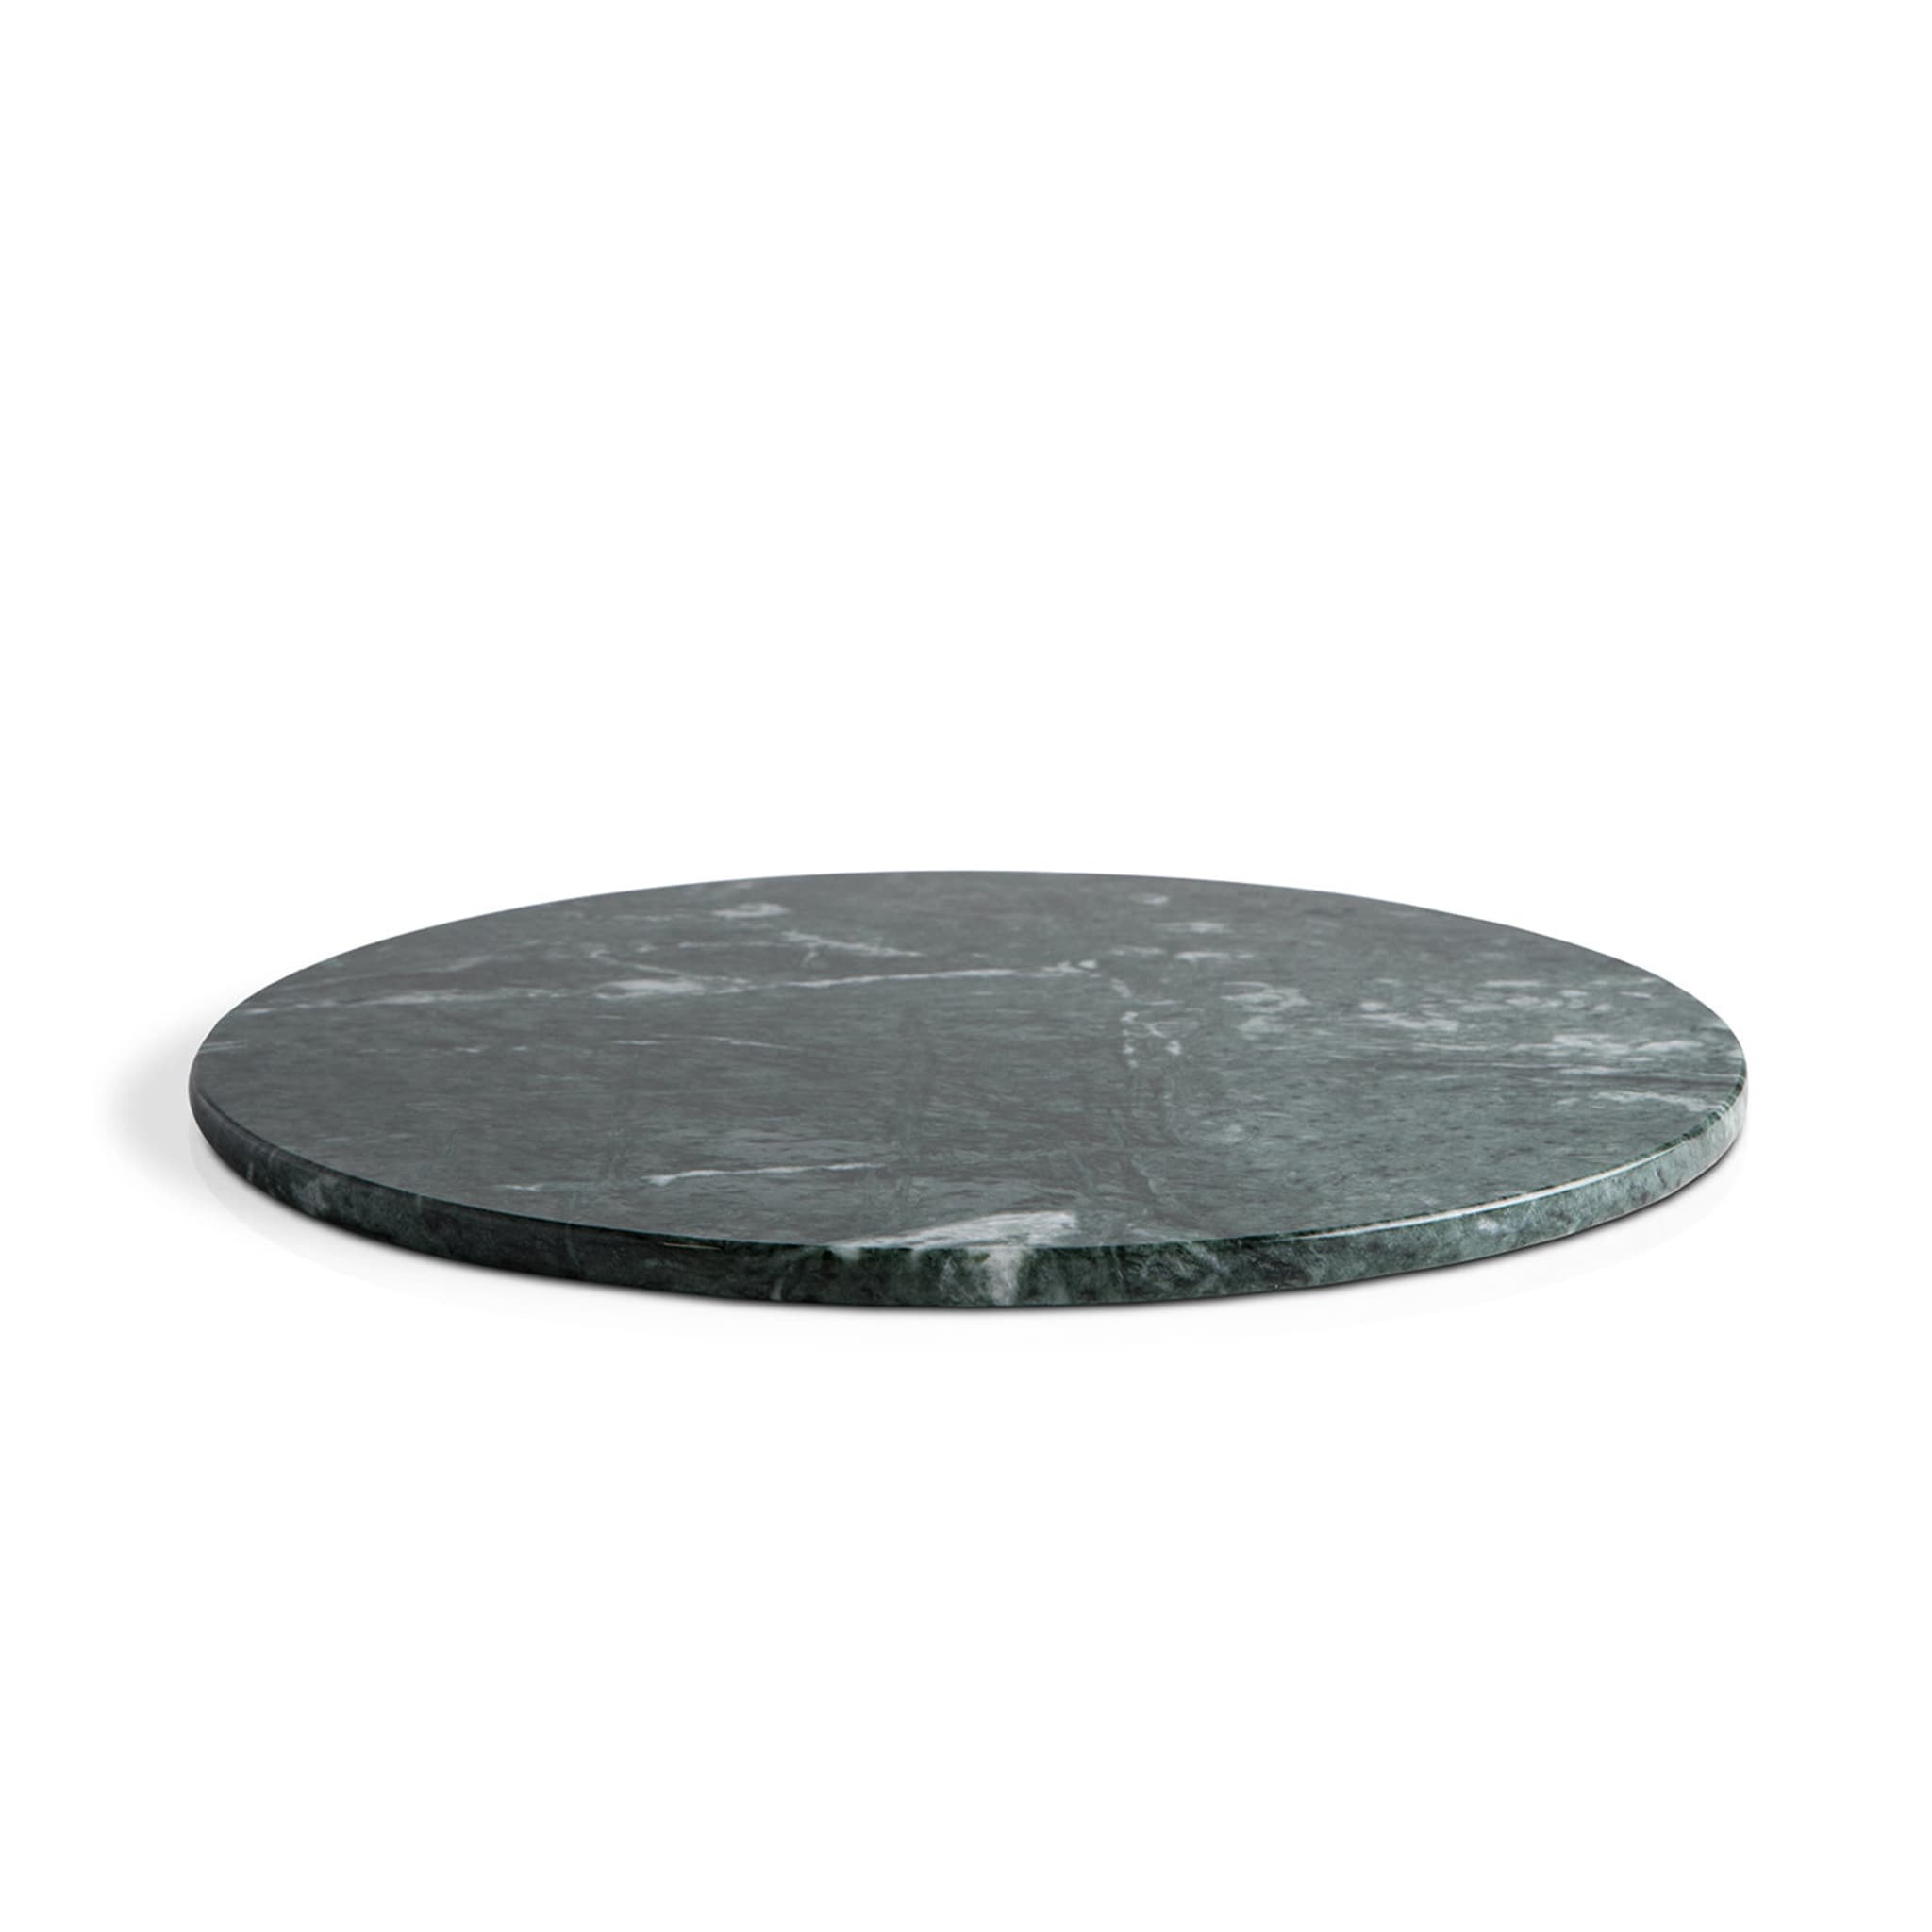 Black Marble Cheese Plate  - Alternative view 1